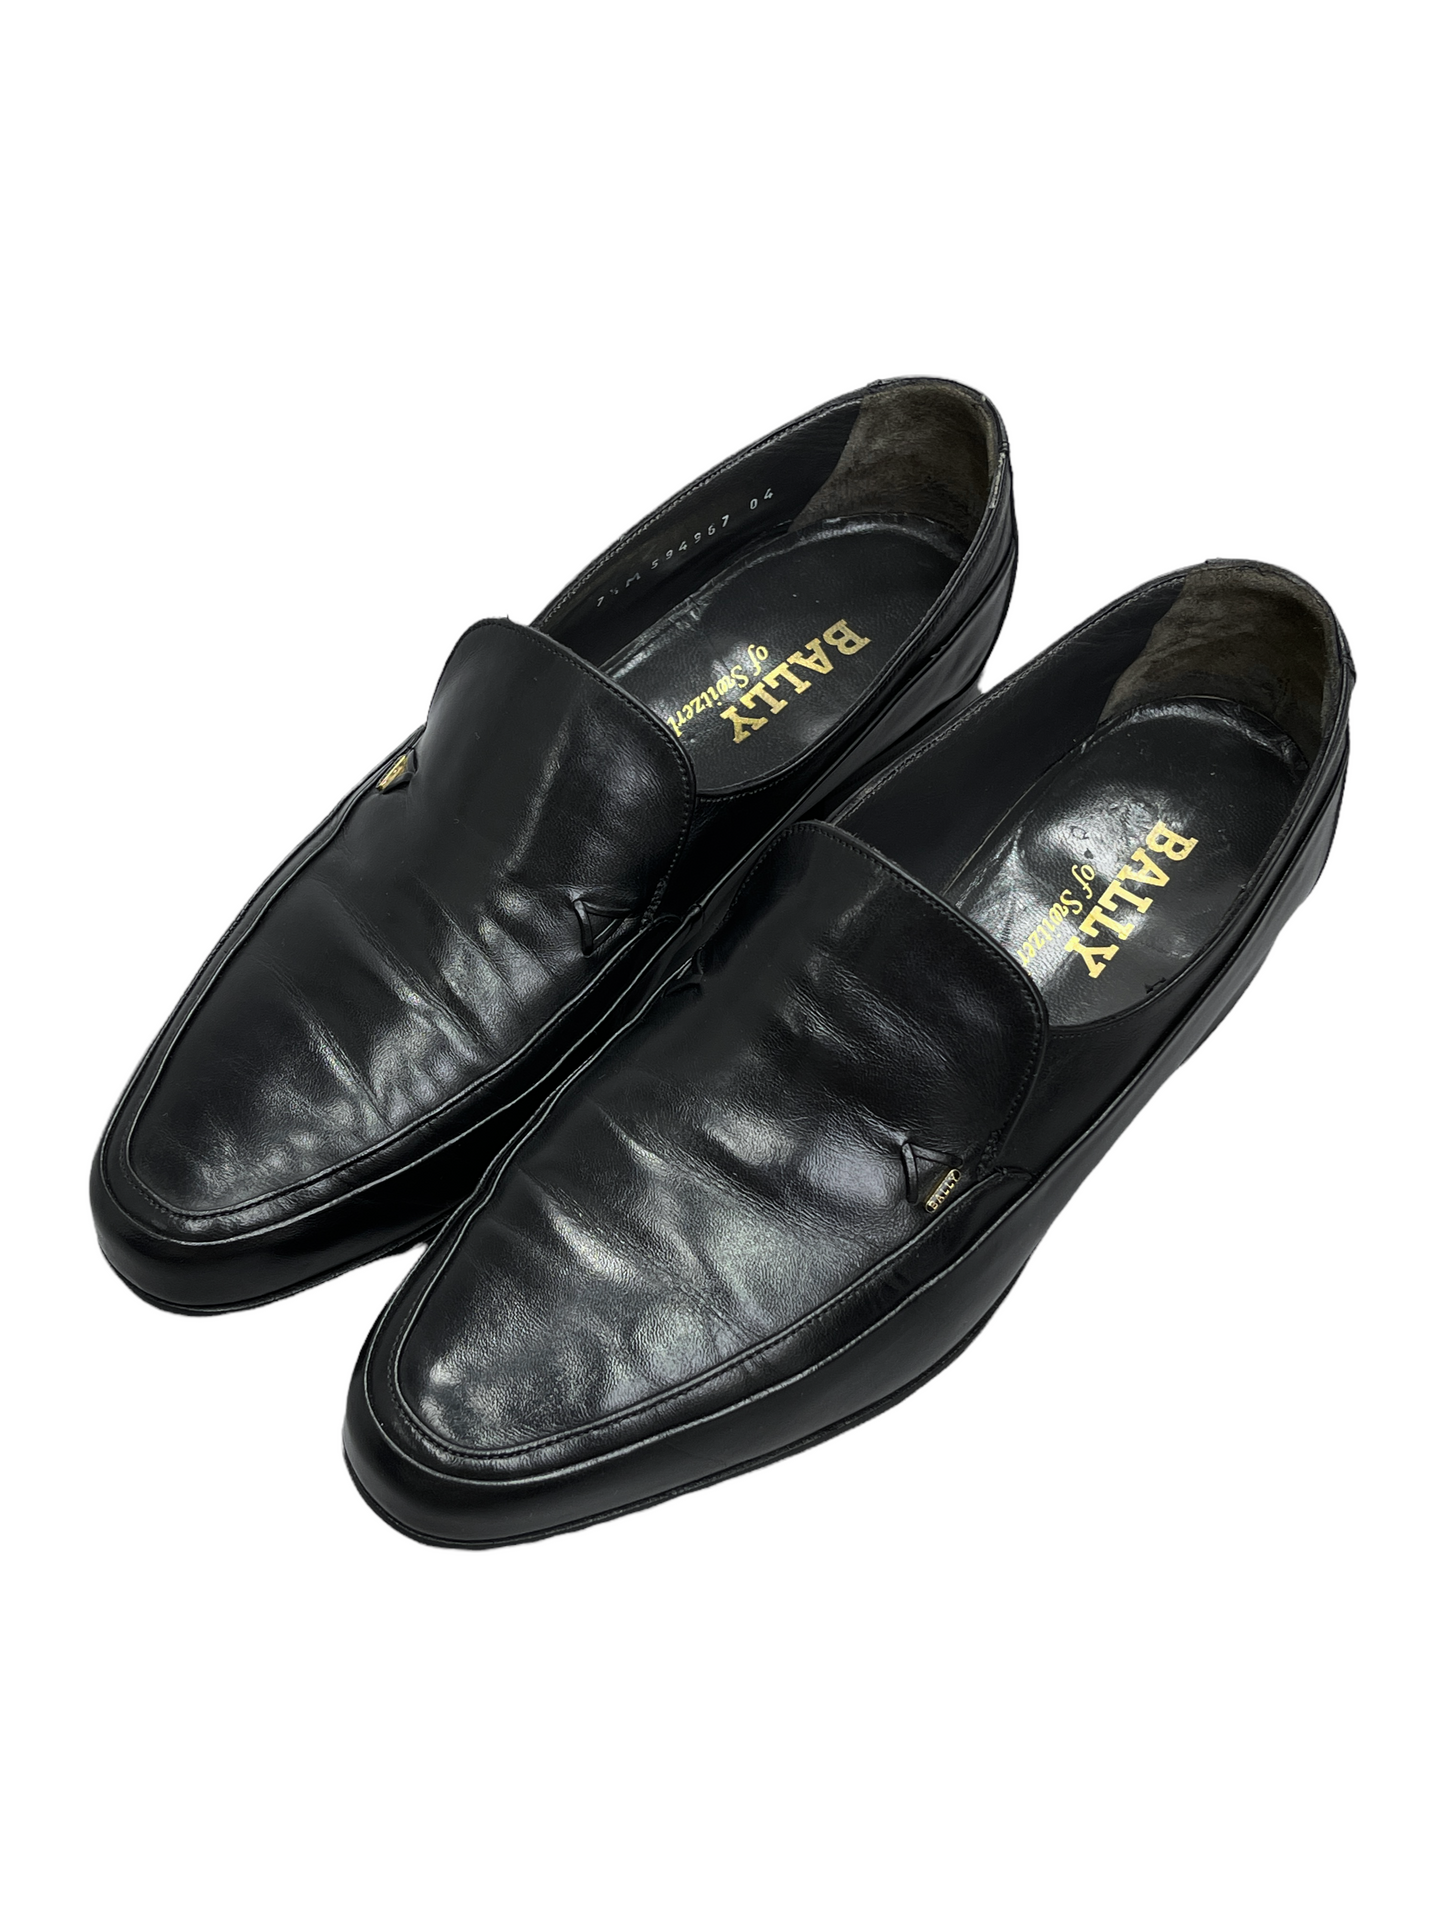 Bally Black Leather Penny Loafers 7.5 D US - Genuine Design Luxury Consignment for Men. New & Gently Used Clothing, Shoes, & Accessories. Calgary, Alberta, Canada.